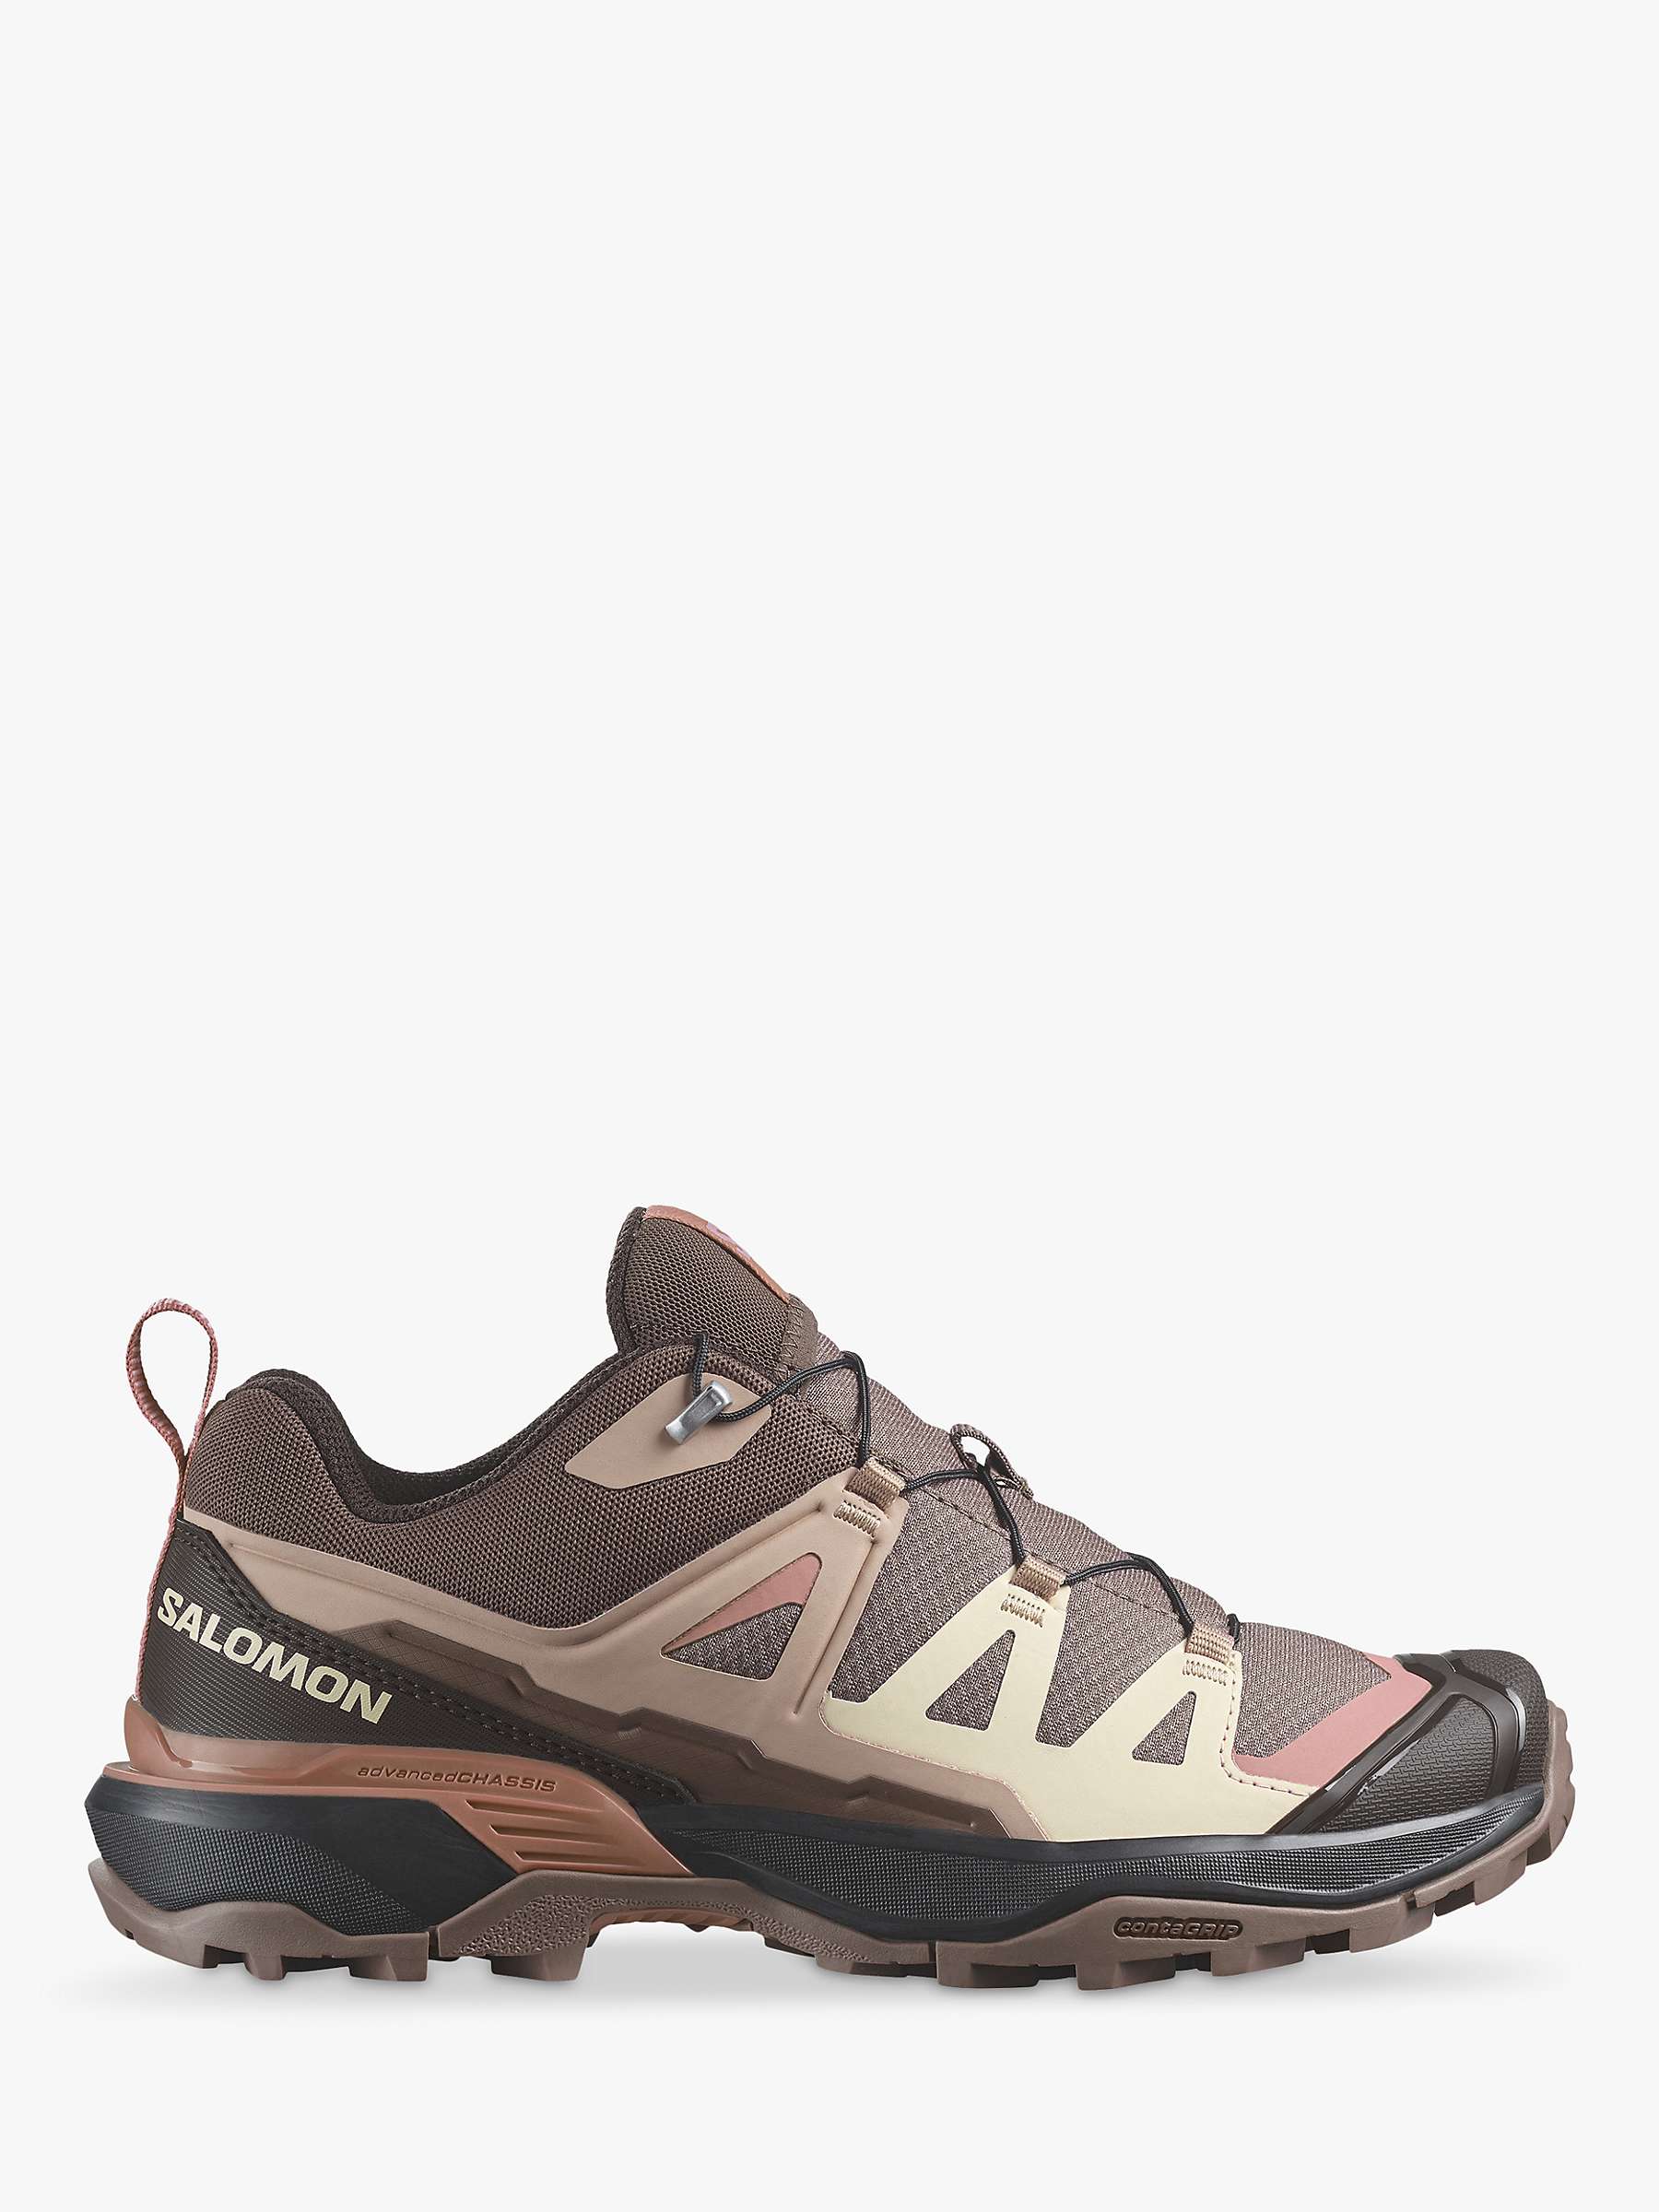 Buy Salomon X Ultra 360 Women's Sports Shoes, Deep Taupe/Neutral Online at johnlewis.com